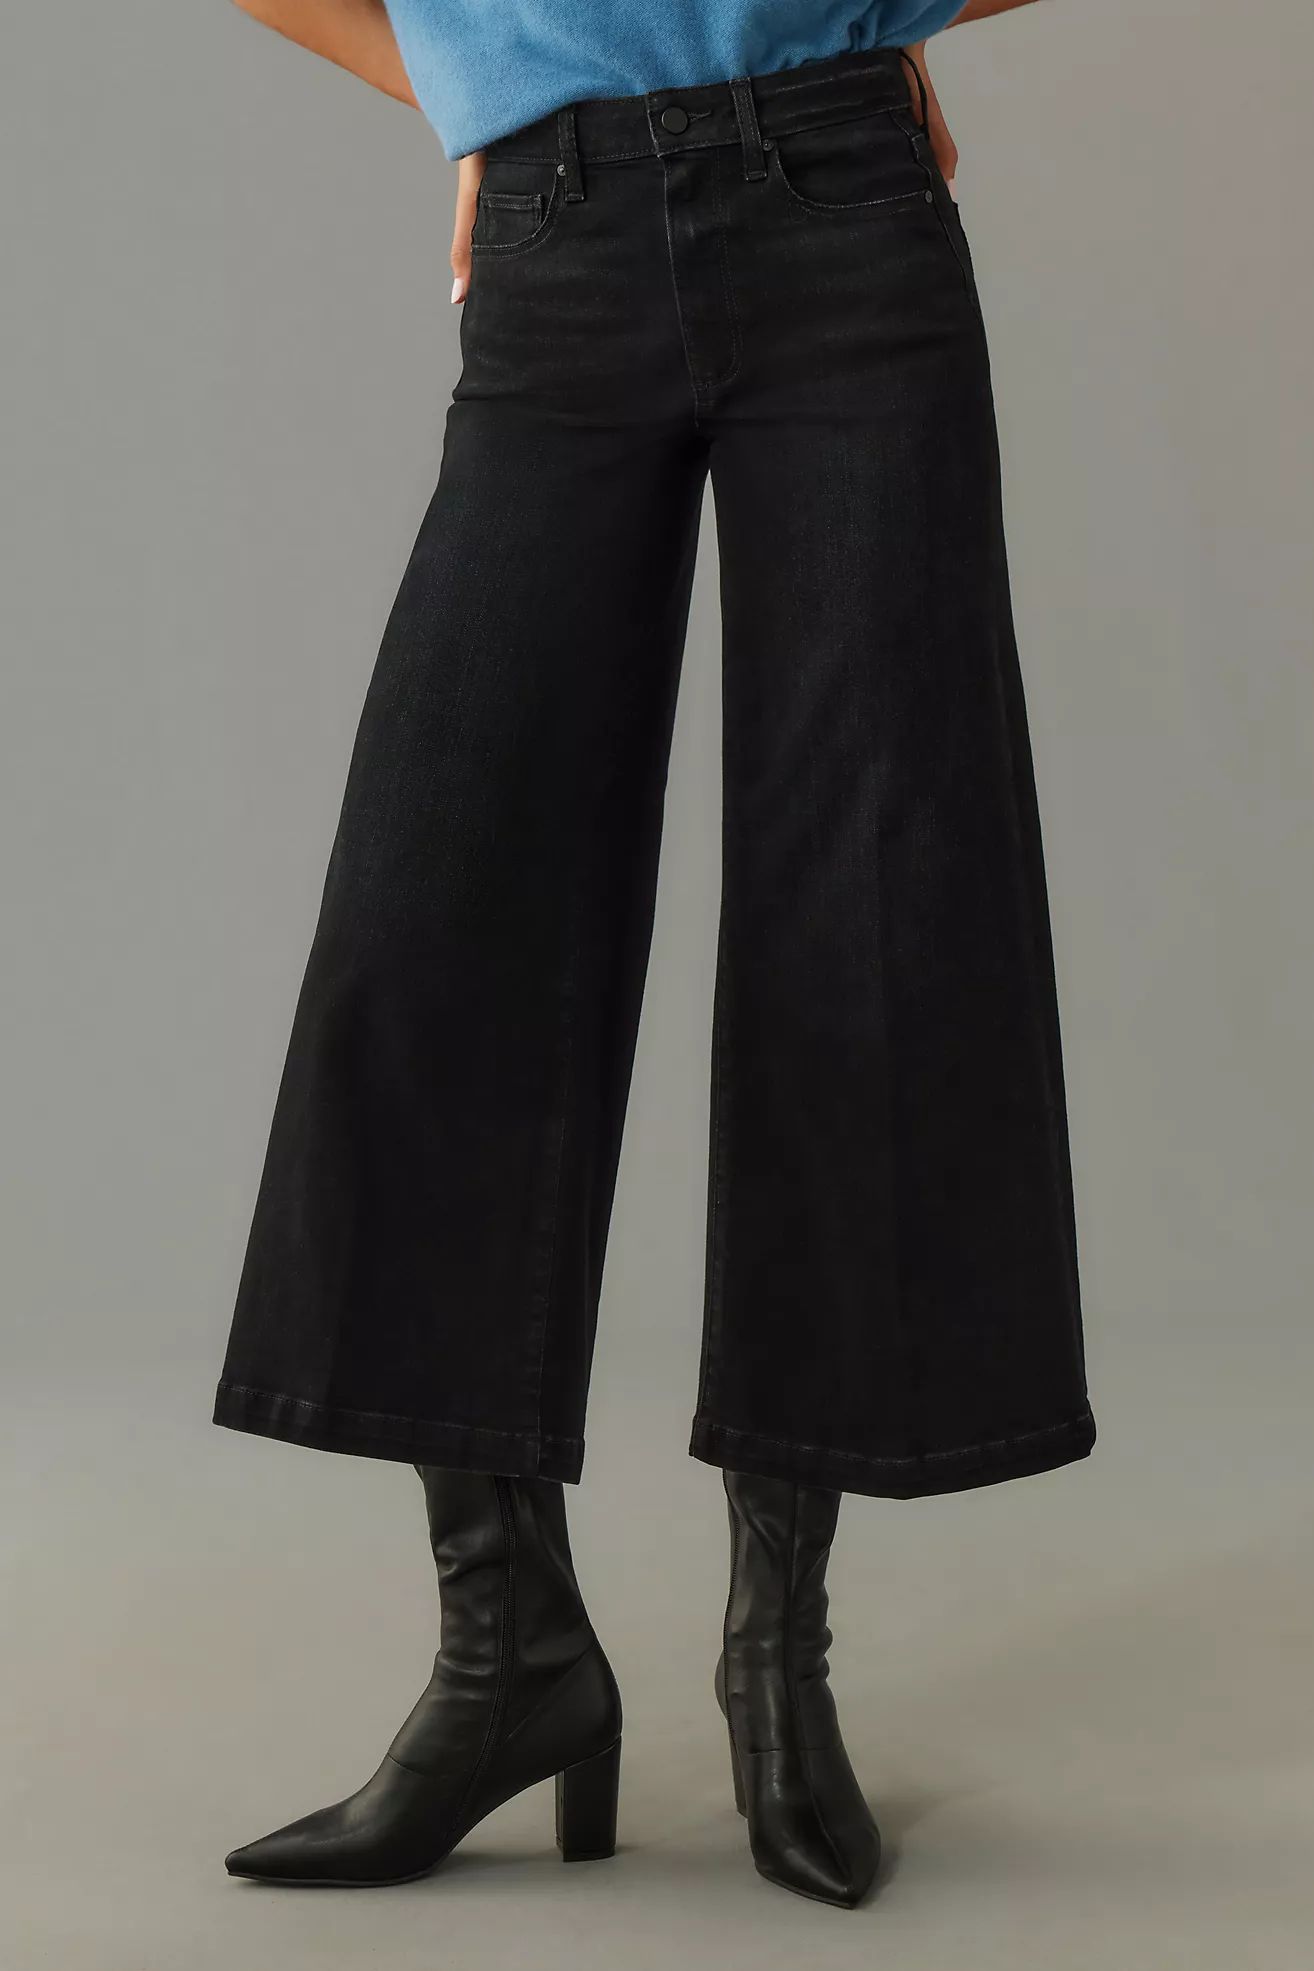 Paige Frankie High-Rise Crop Wide-Leg Jeans | Anthropologie (US)